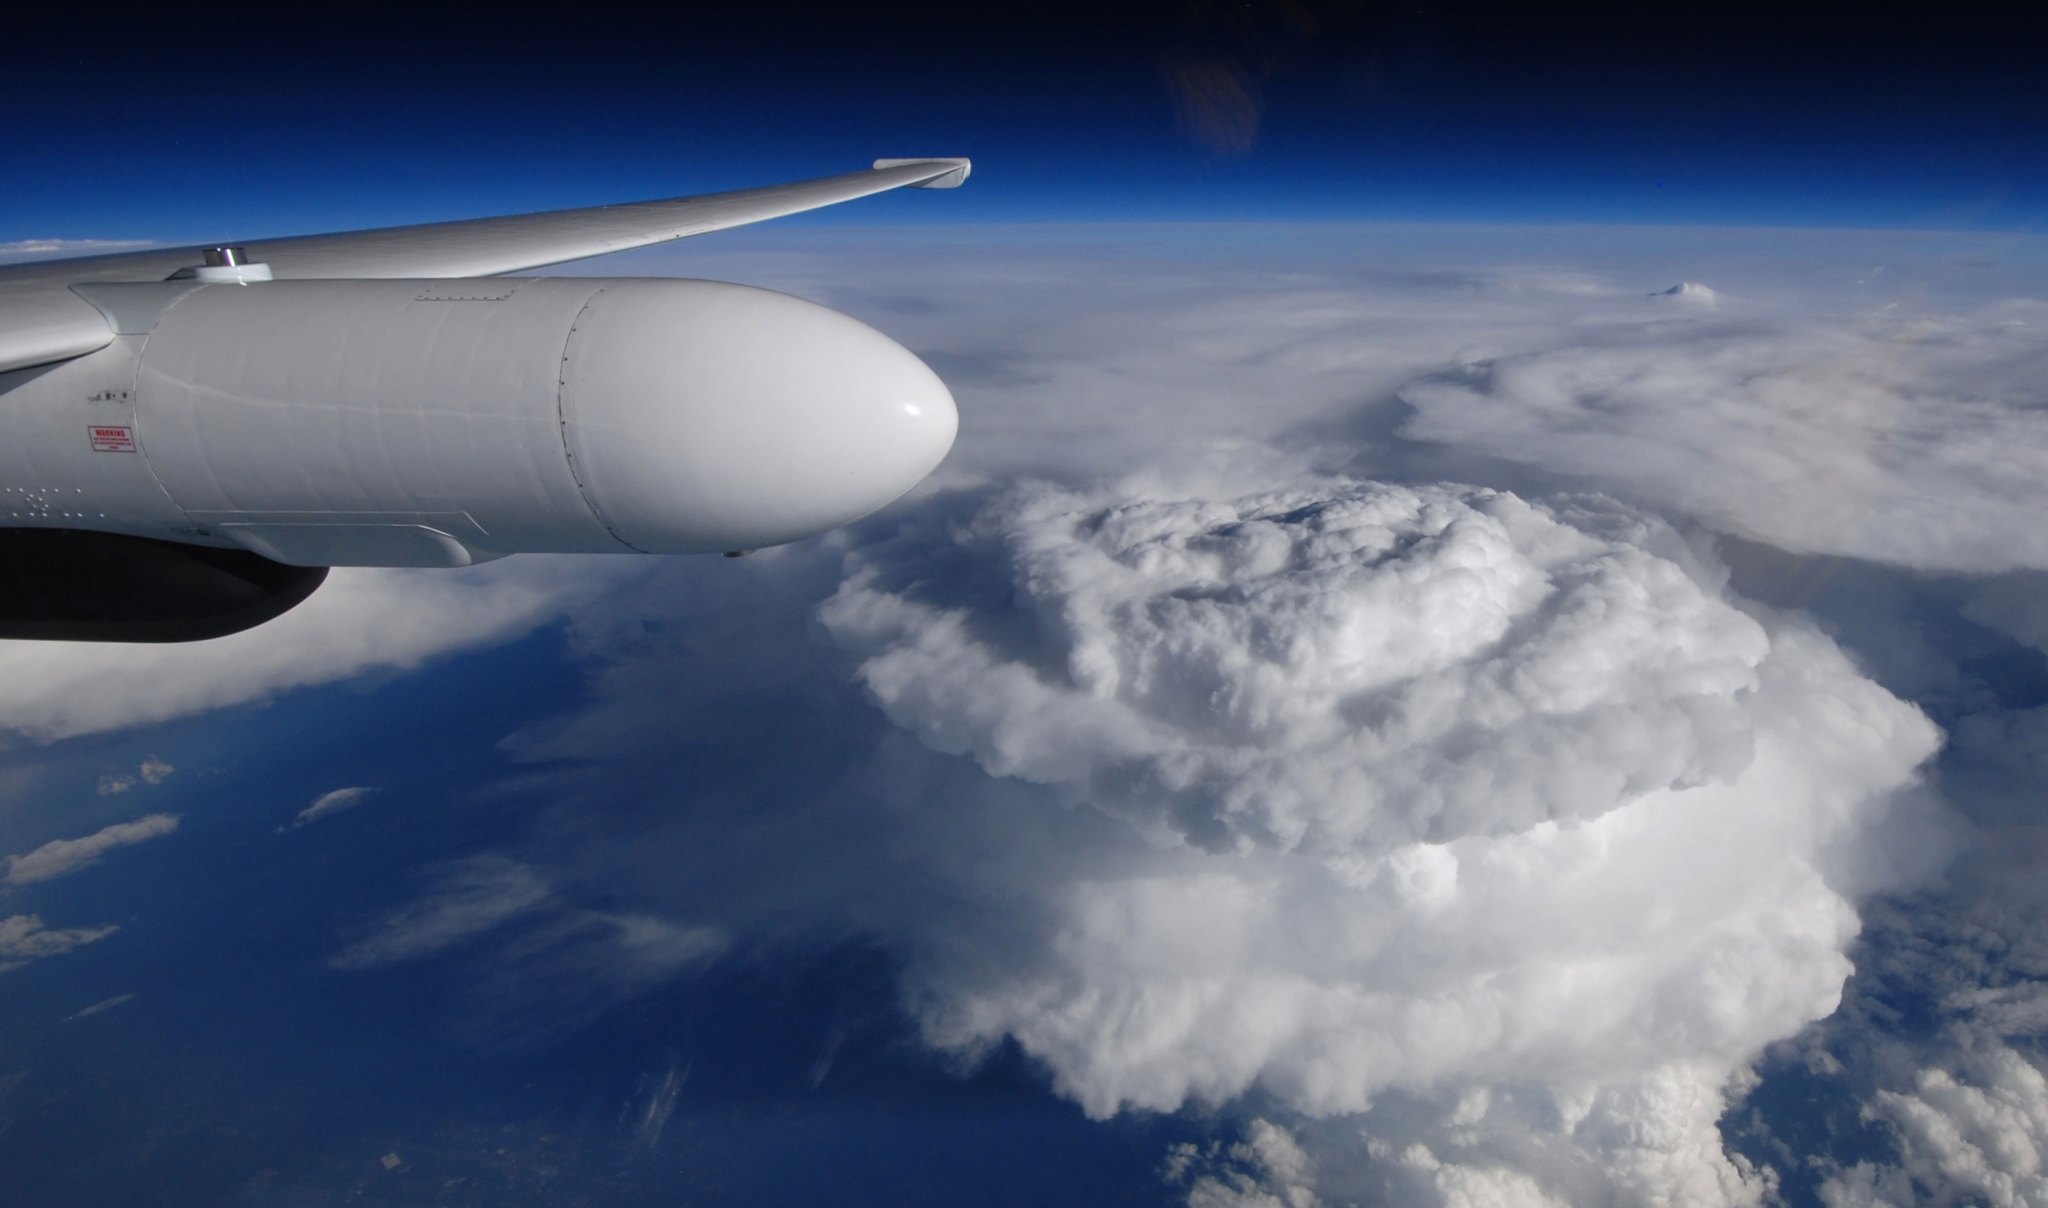 A storm system over North Carolina was the focus of a May 2014 flight by NASA's ER-2.